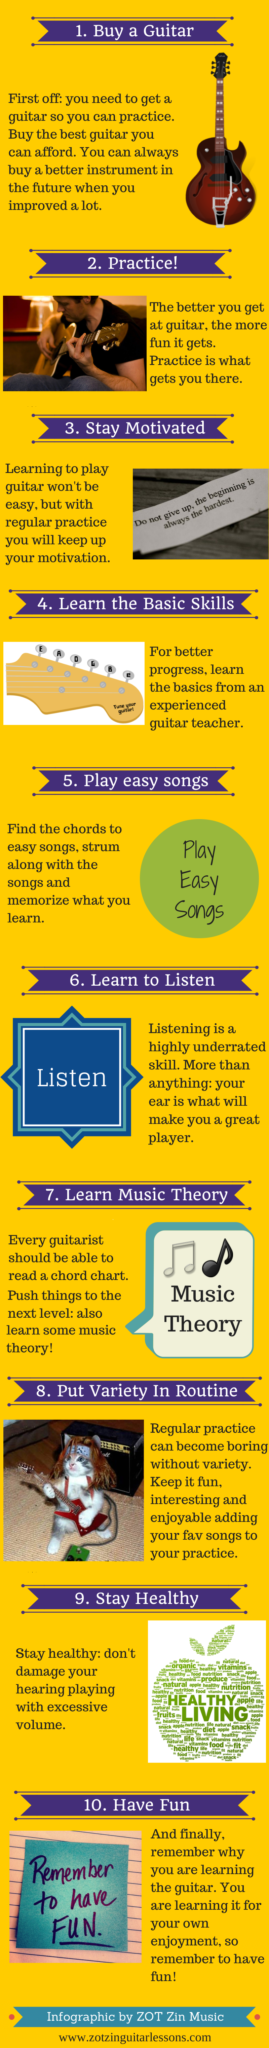 Infographic-10-Principles-for-Learning-Guitar